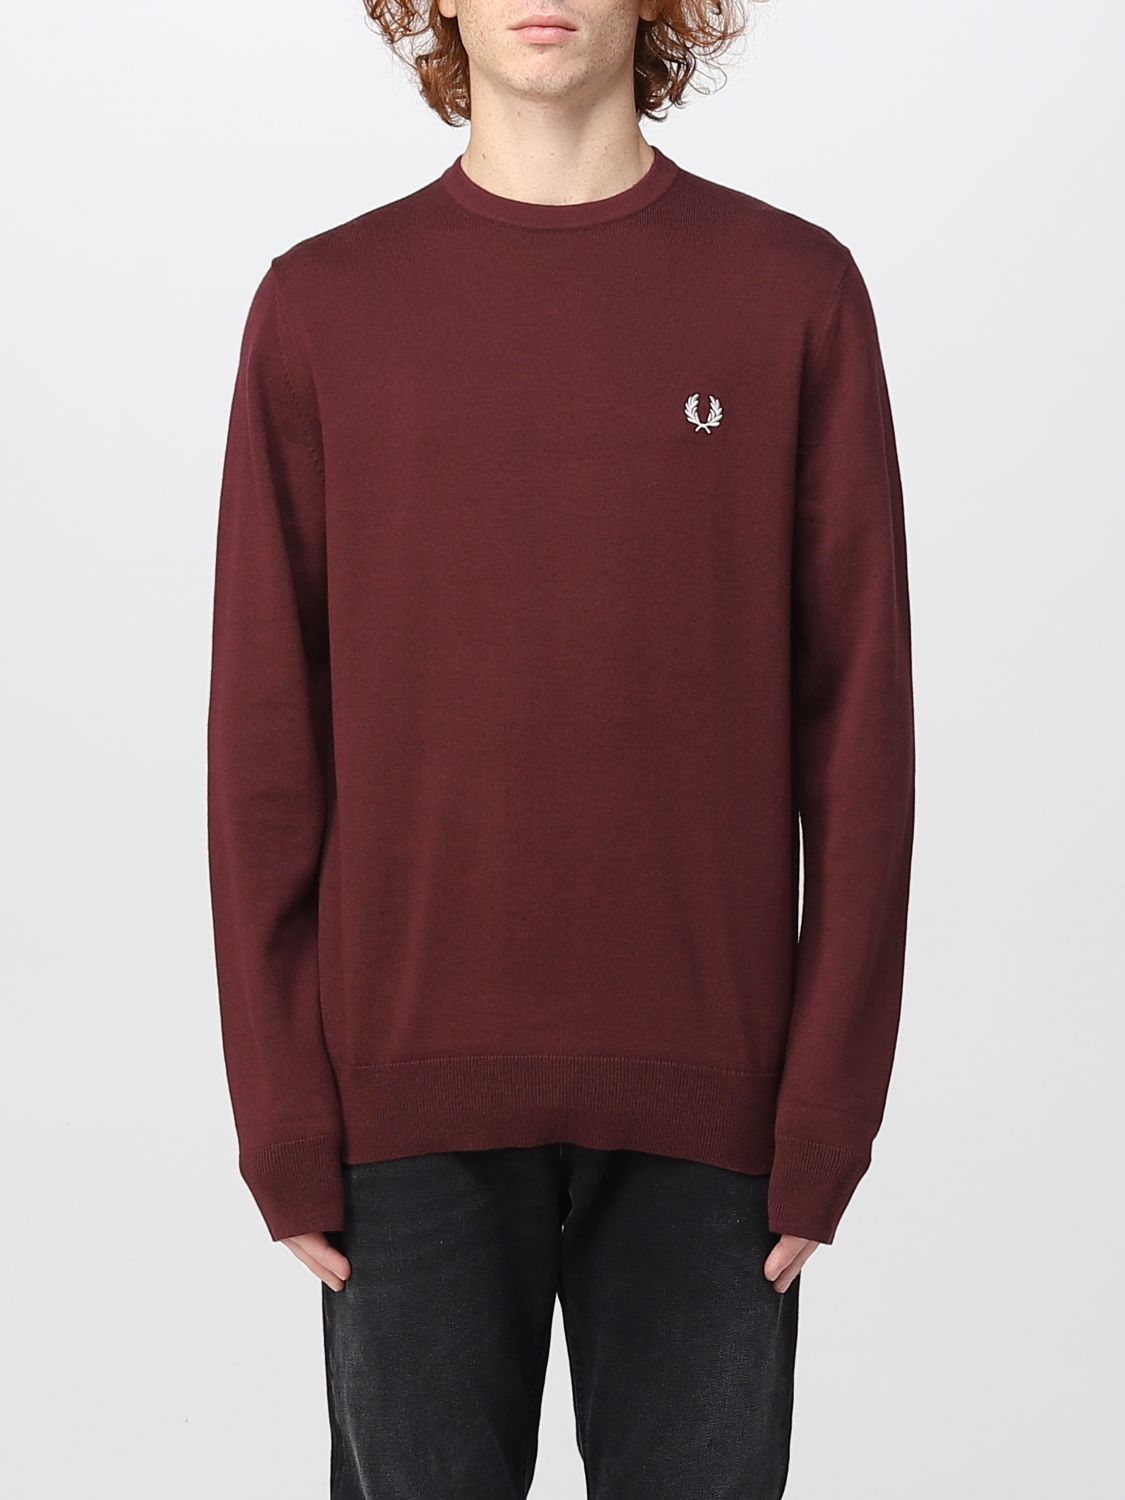 Sweater Fred Perry: Fred Perry sweater for man burgundy 1